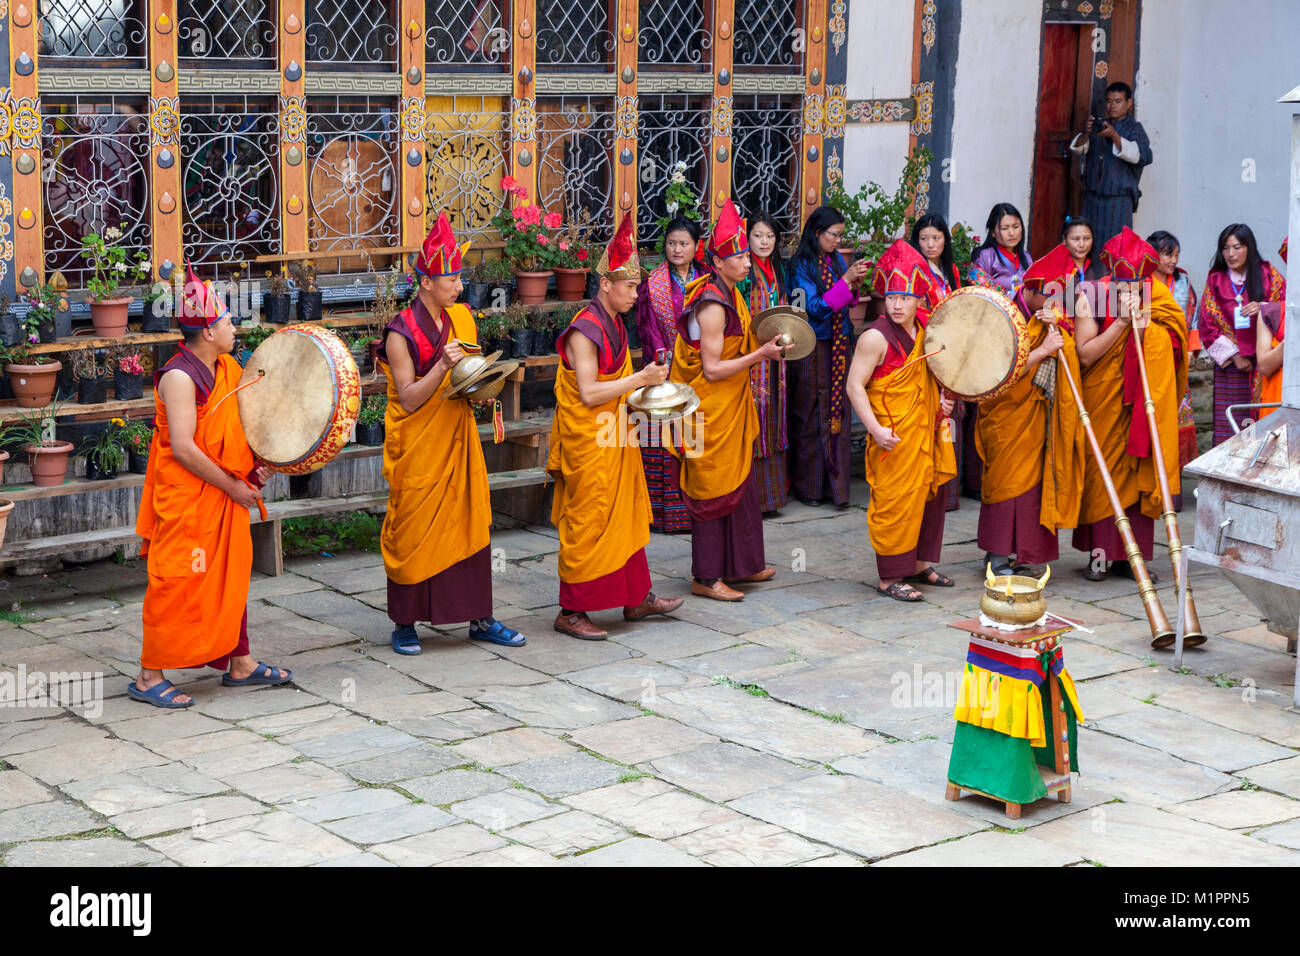 Bumthang, Bhutan.  Buddhist Monks in Religious Ceremony in Courtyard of  Jambay Lhakhang Monastery. Stock Photo